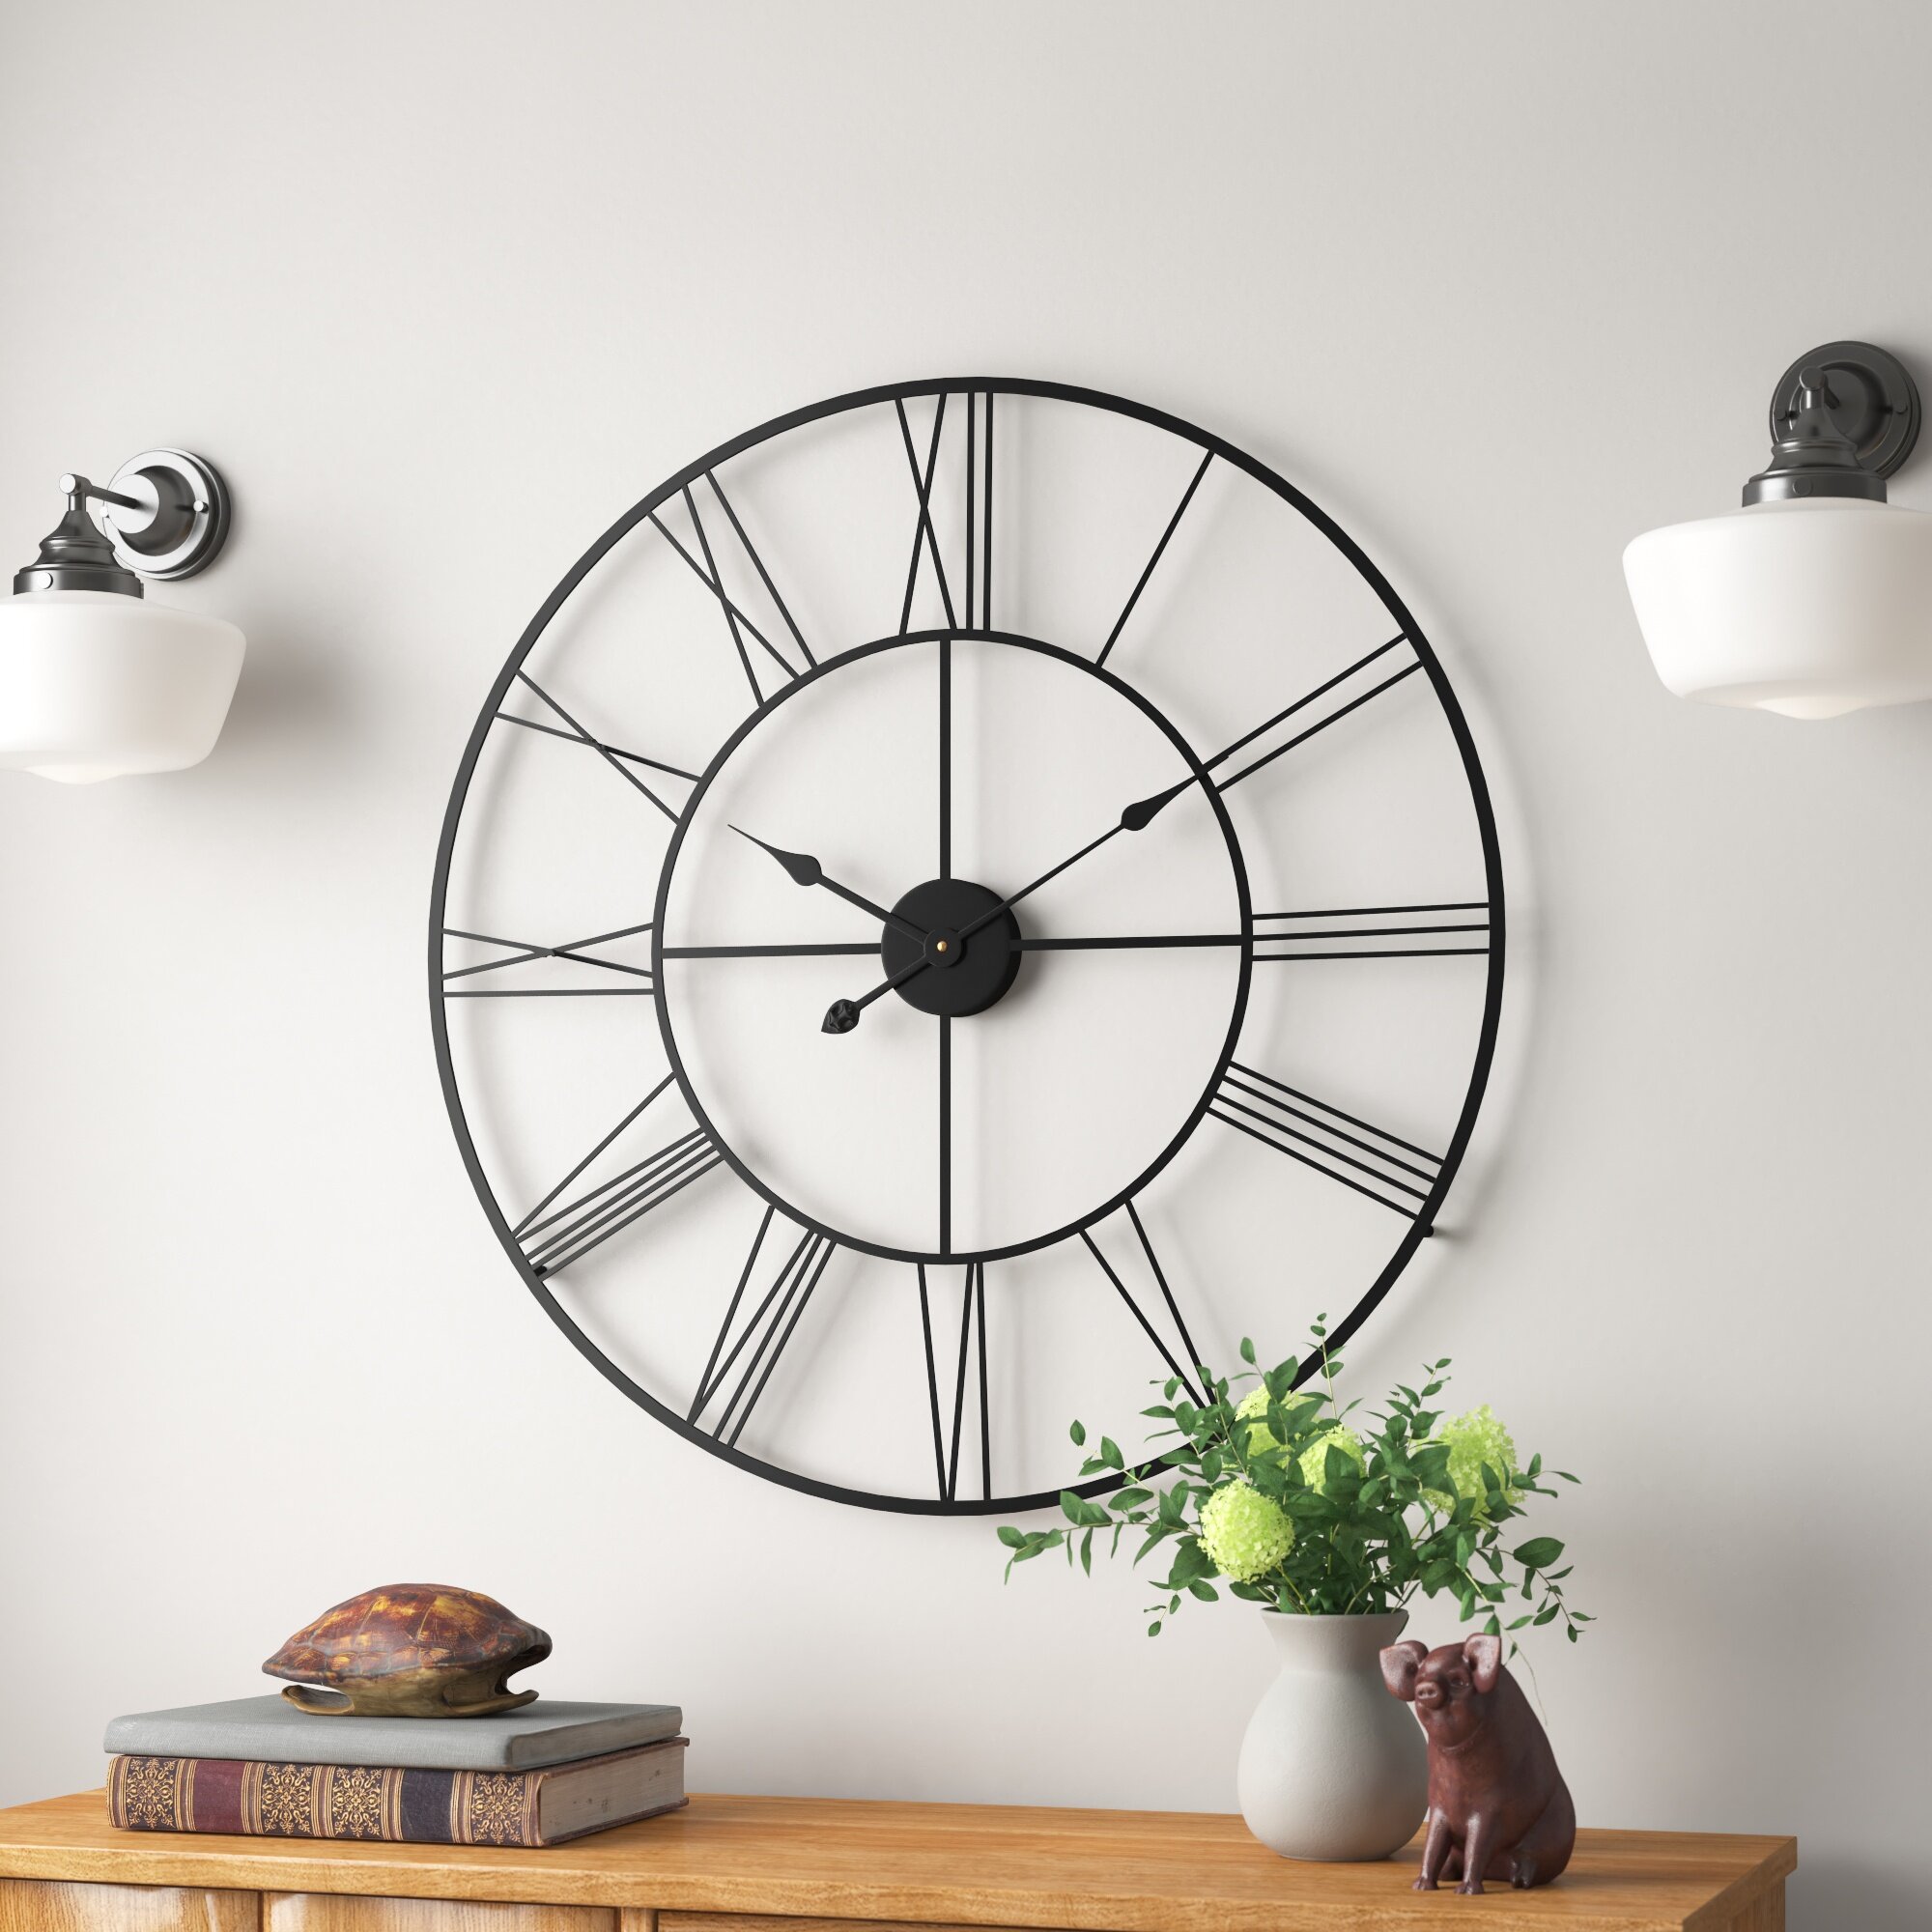 yyone Accurate Silent Non Ticking Battery Operated Wooden Decorative Wall Clock for Office Living Room Bedroom 12inch Circle of Fifths Round Wooden Wall Clock